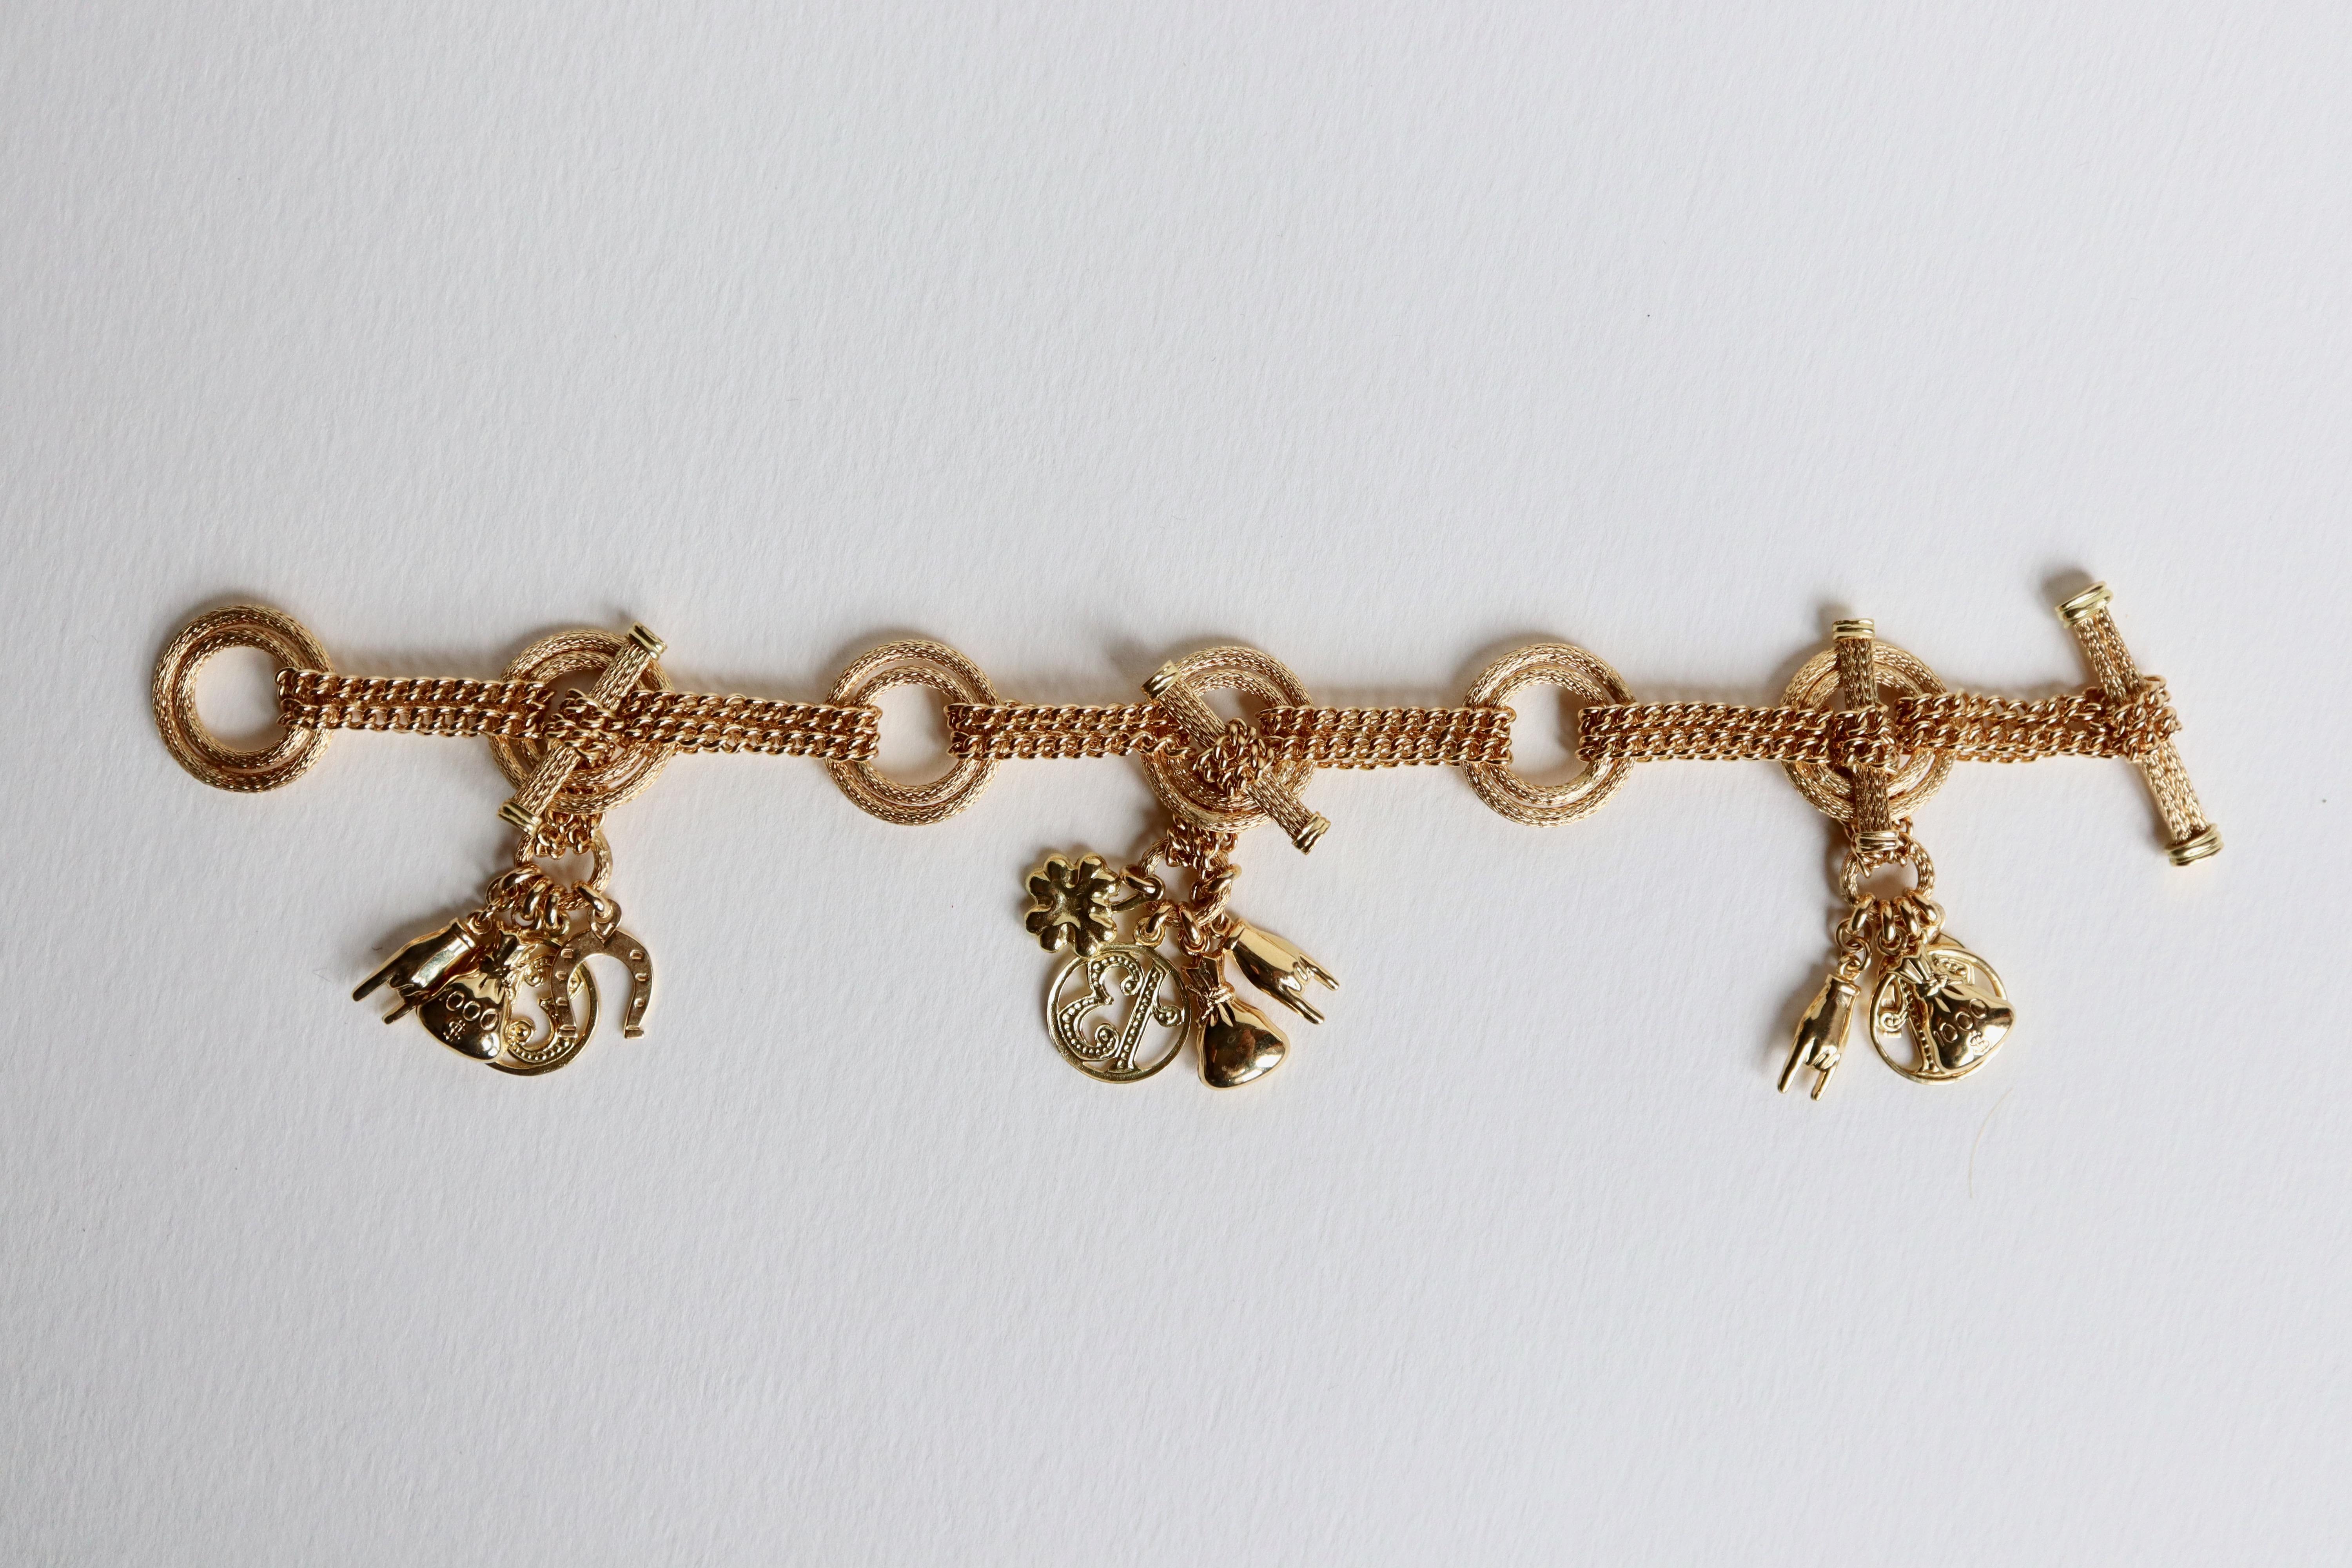 Charms bracelet in 18 carat yellow gold Double chain alternating with double chiseled circles retaining 3 groups of detachable charms, on each group: a number 13, a hand, a bag of 1000 dollars, a horseshoe and a clover with 4 leaves. Stick clasp.